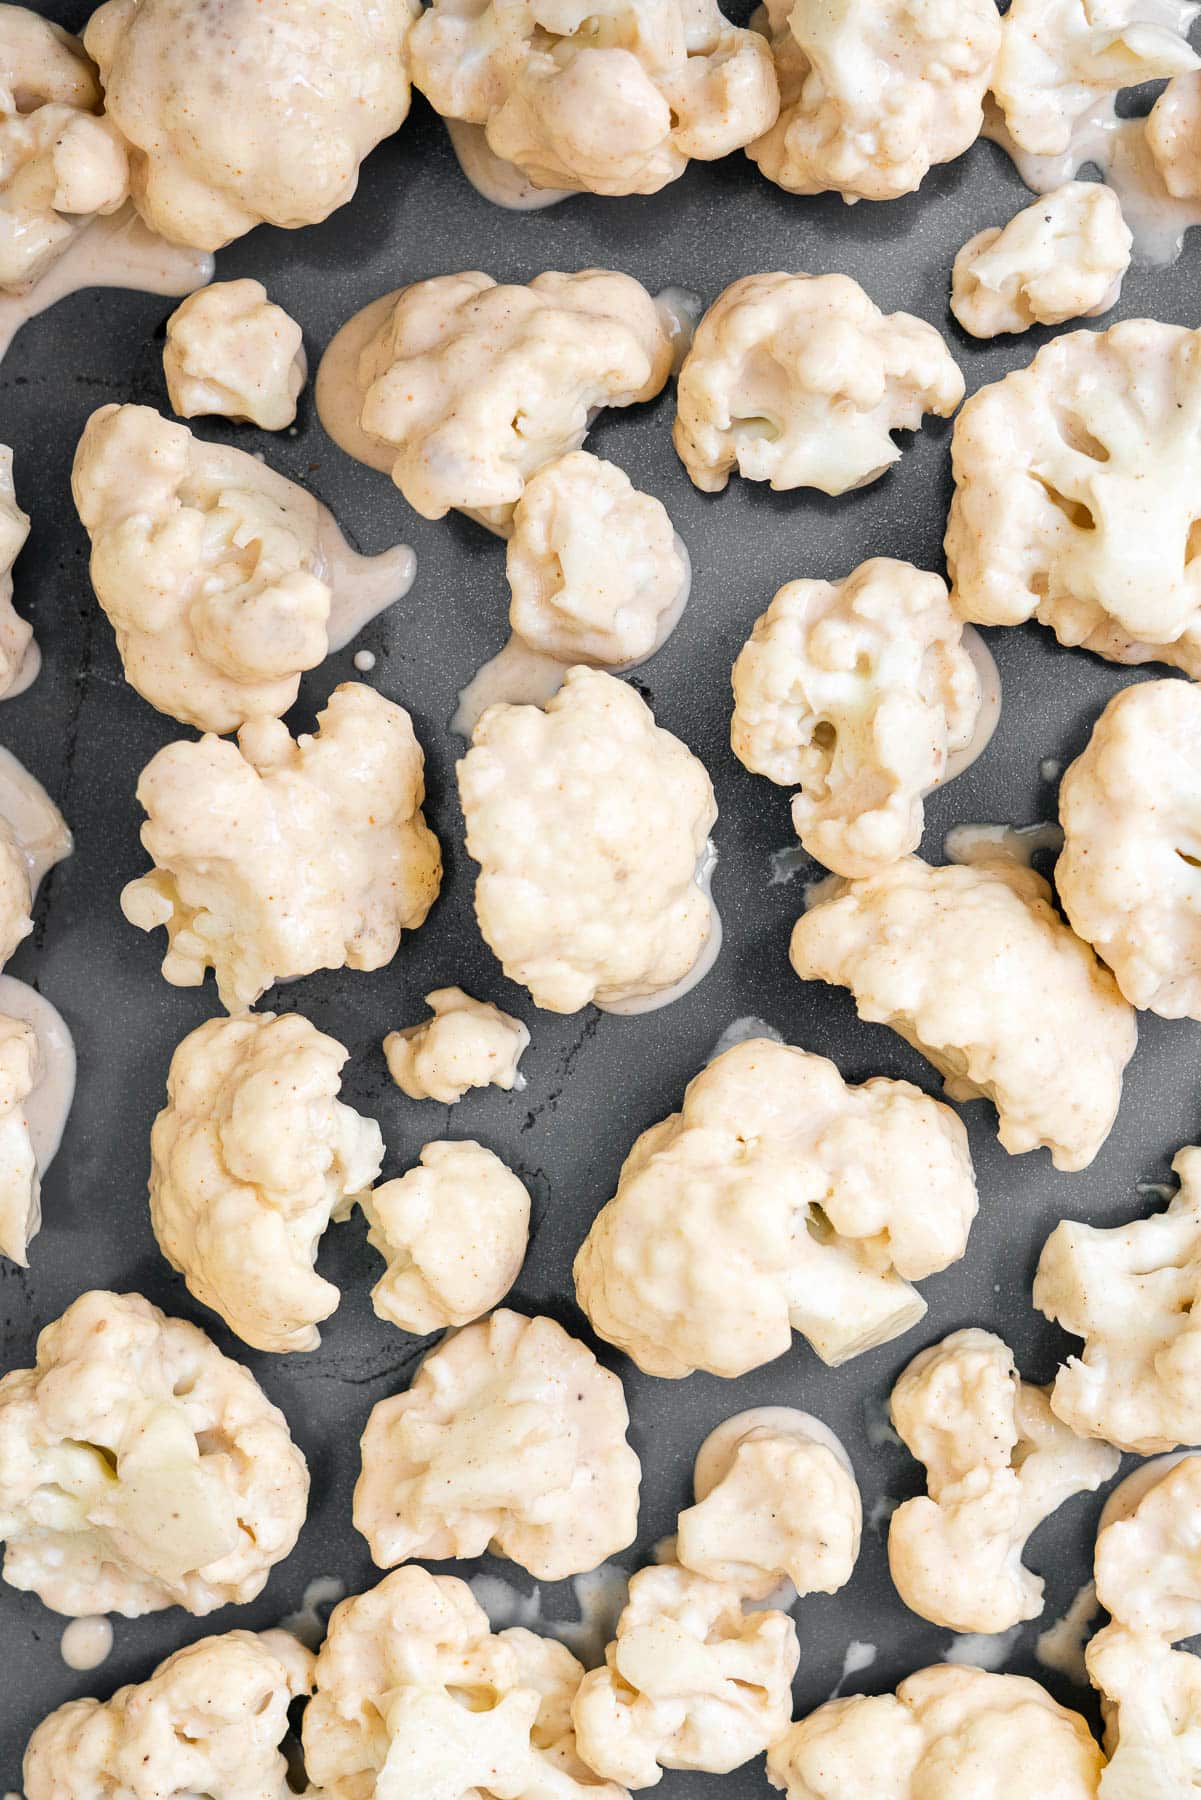 cauliflower florets coated in batter on a sheet tray, ready to be baked